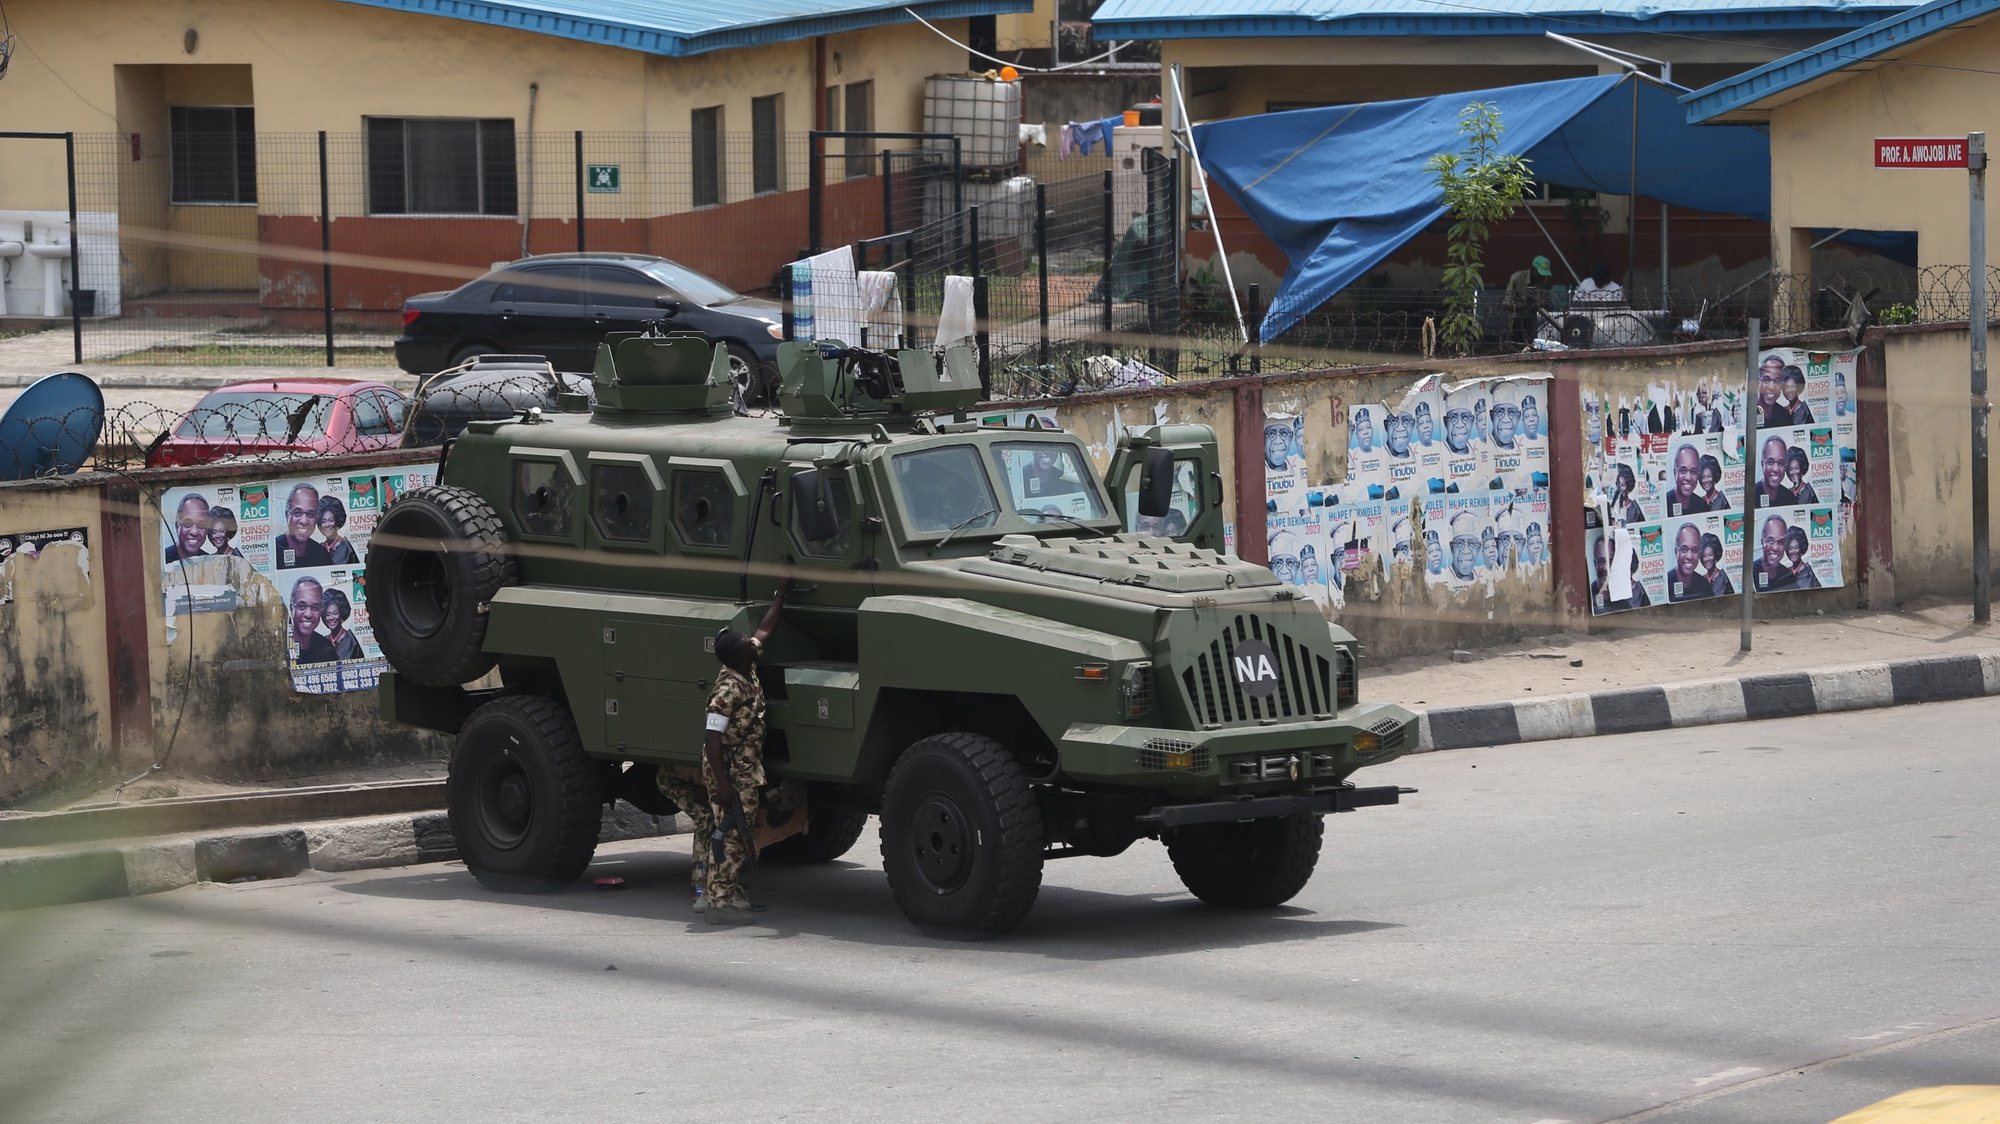 epa10494098 An army armour vehicle is parked near the entrance to the Independent Electoral Commission (INEC) office in Lagos, Nigeria, 27 February 2023. Tensions are high across the country as Nigerians await the results of the Presidential and national assembly elections. Nigerians cast their votes on 25 February to elect a new president, vice president and members of the Senate and House of Representatives.  EPA/Akintunde Akinleye